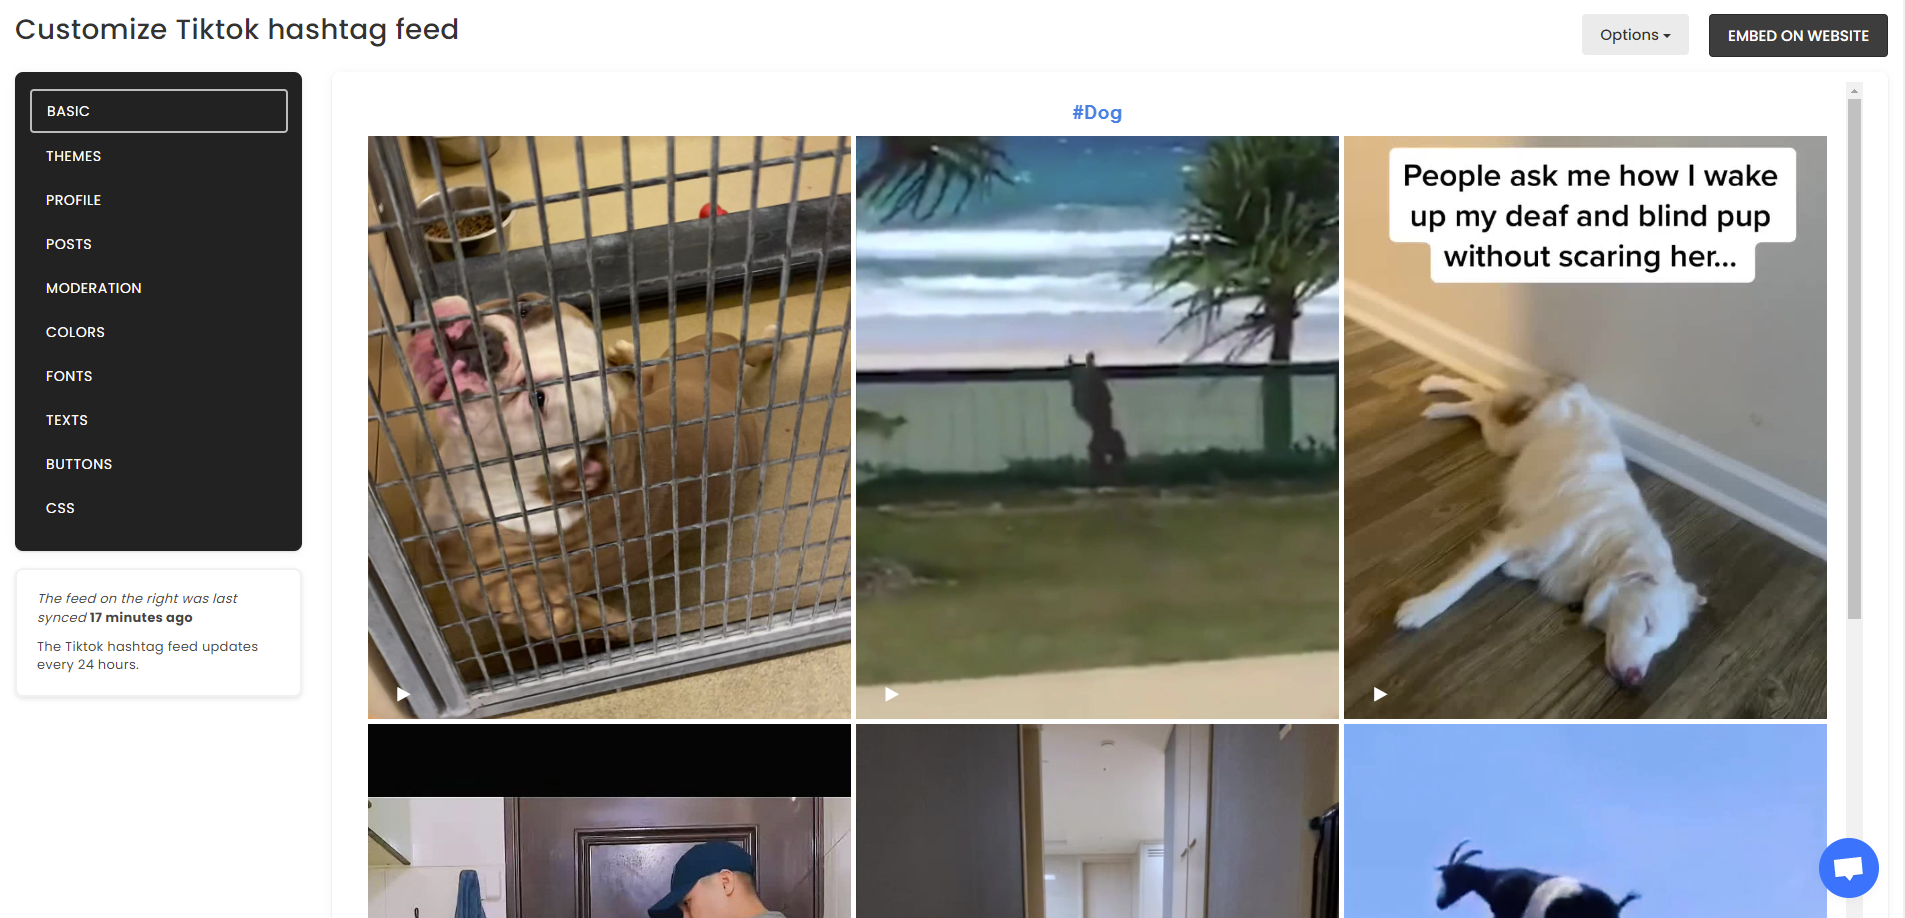 Customize your feed - Free Tiktok Hashtag Feed Widget For Shopify Website